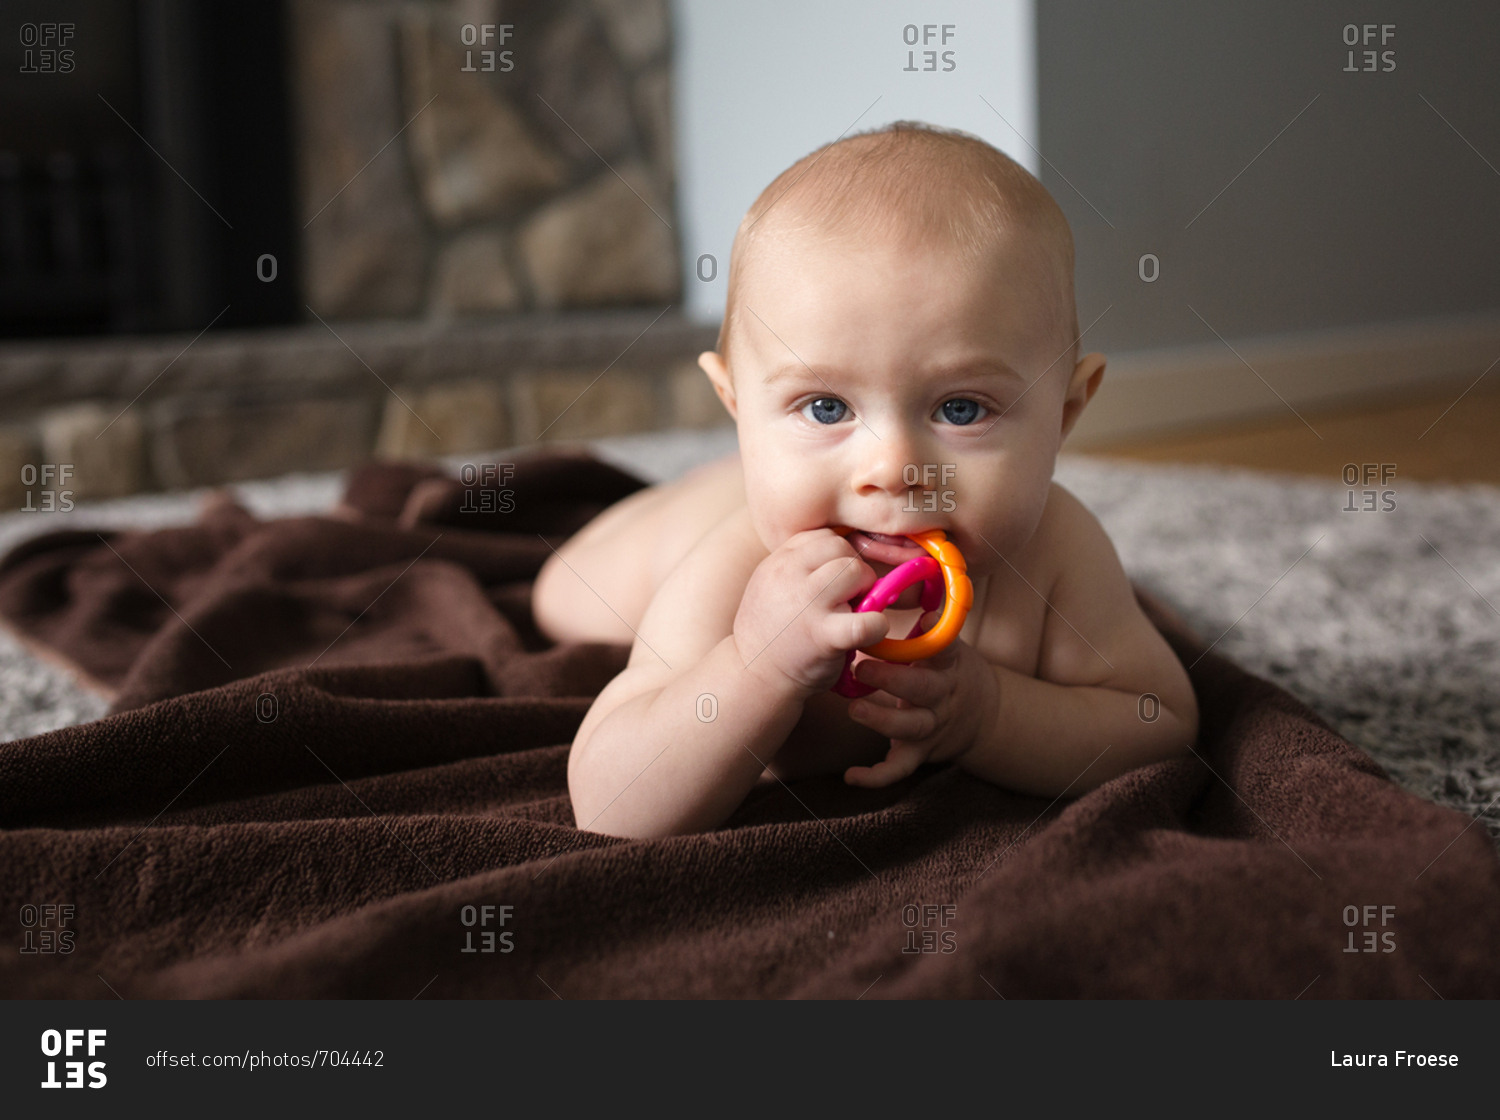 Naked baby chewing on toy while lying on blanket